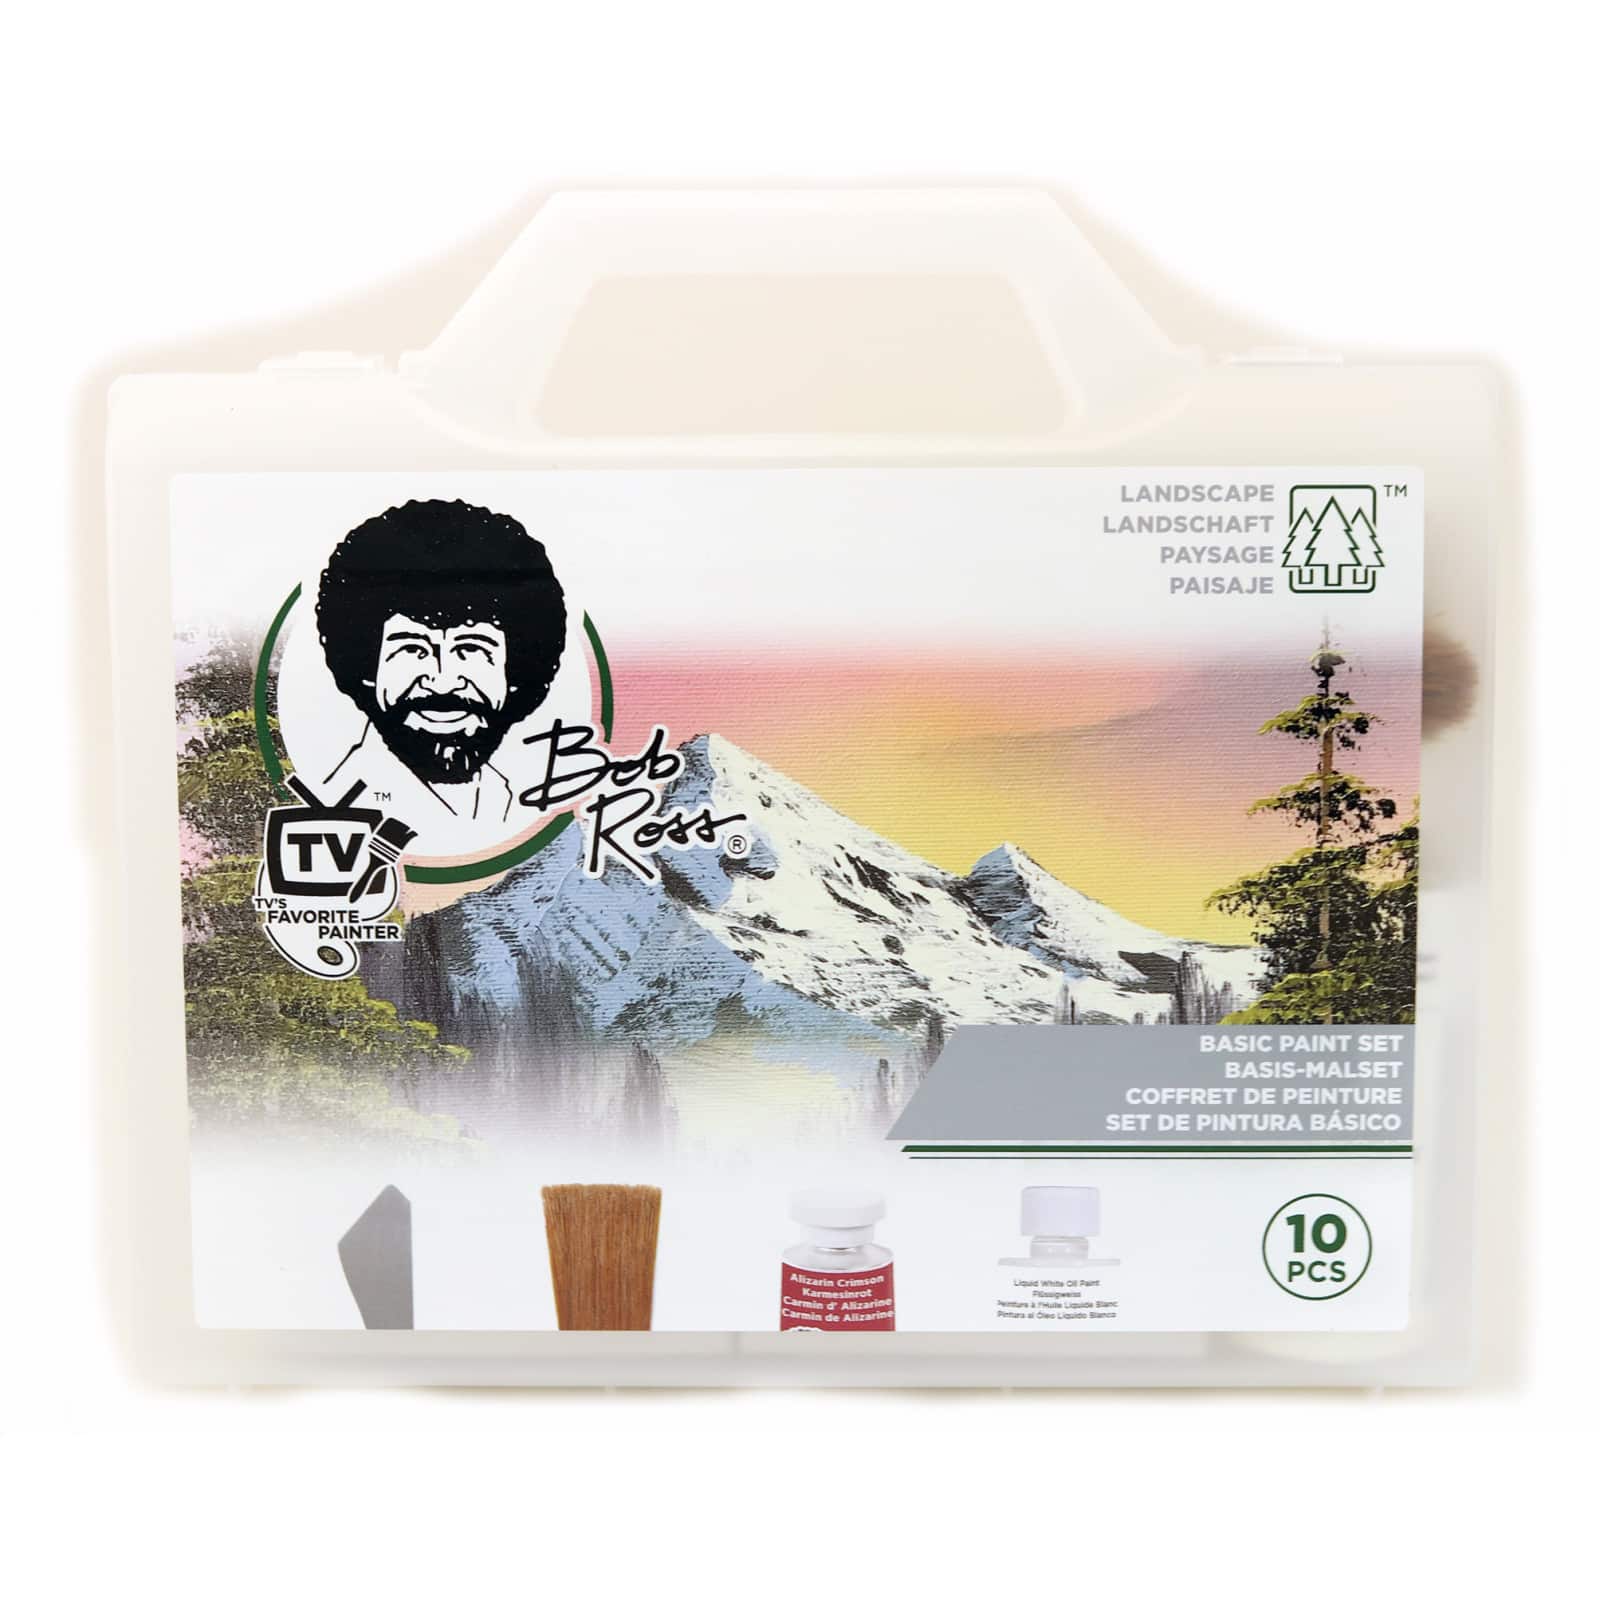 Painting Supplies - Accessories - Easels - Bob Ross Inc.